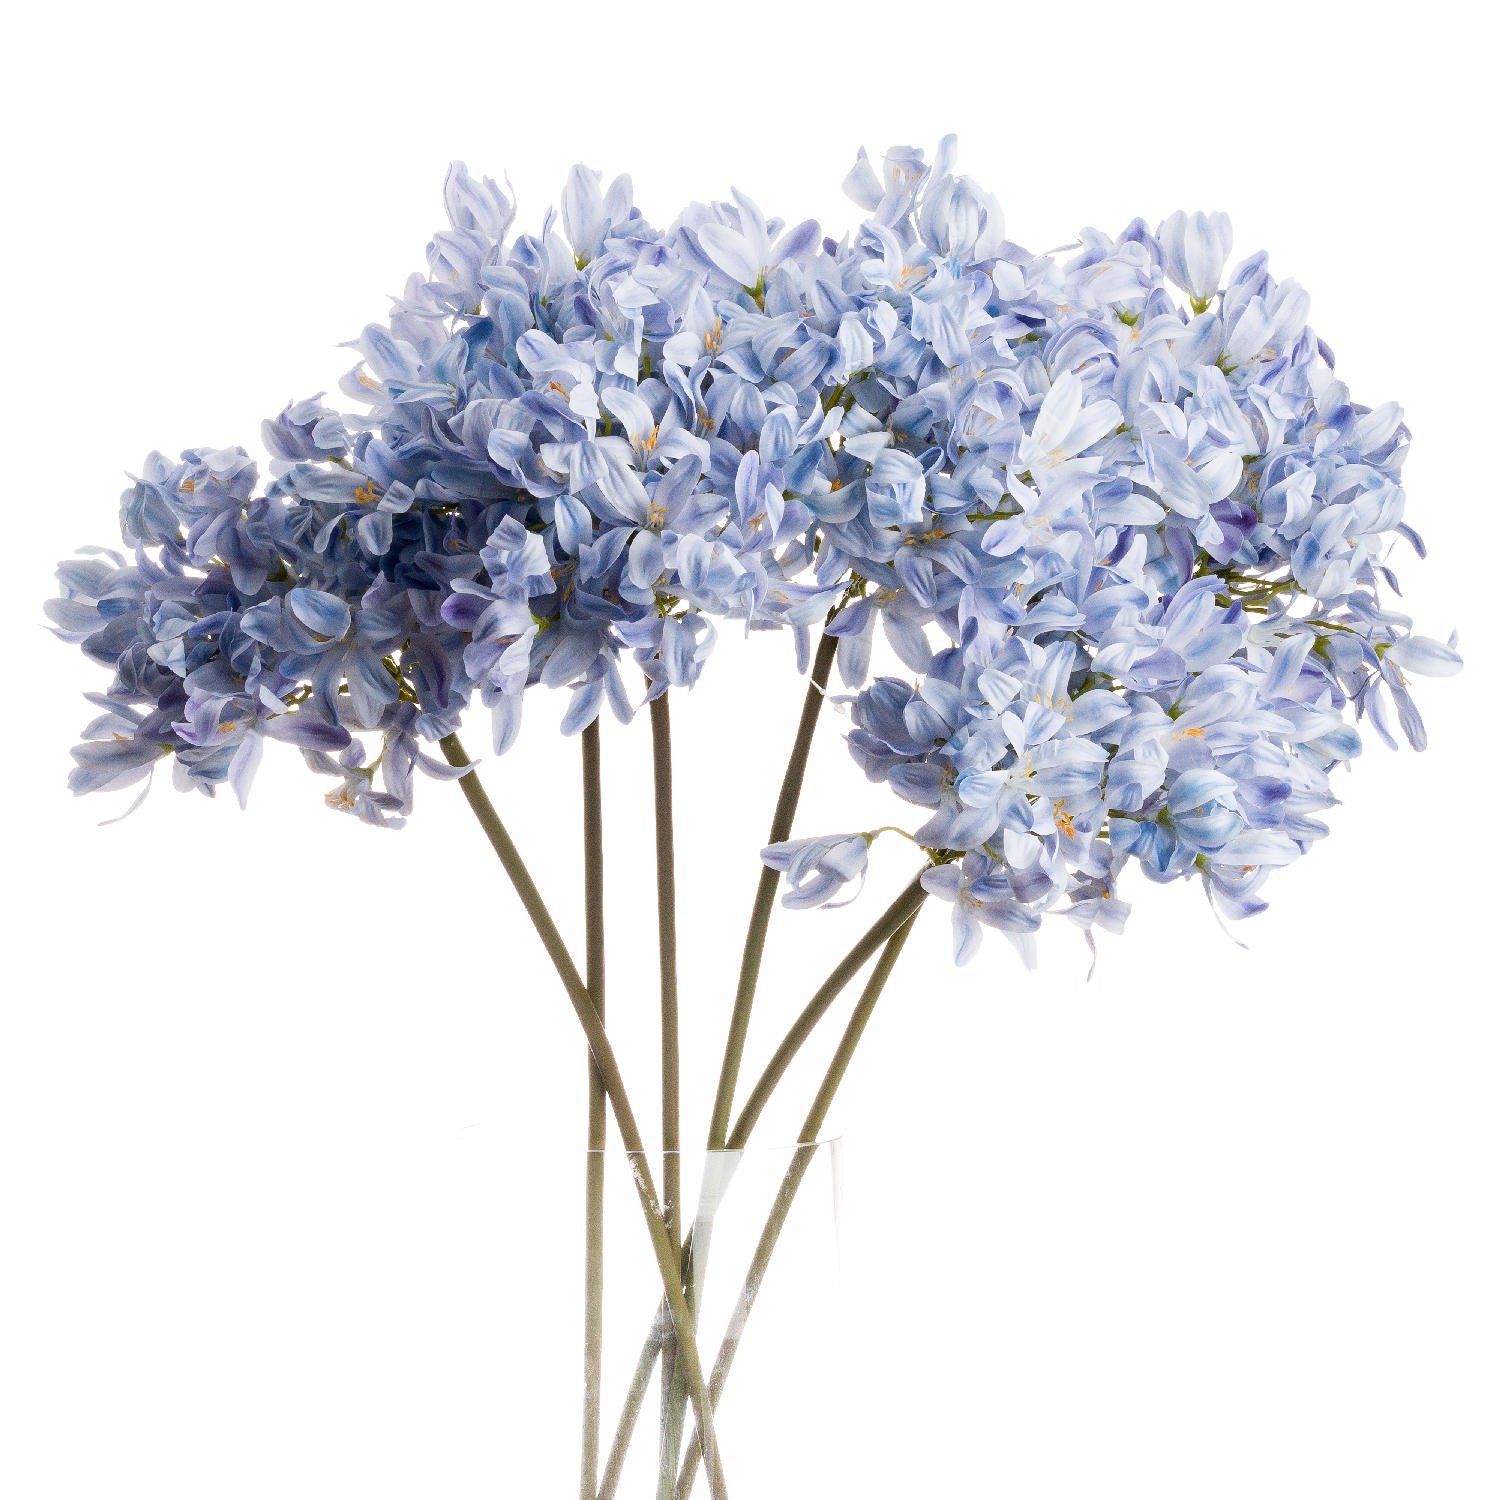 View Light Blue Large Headed Agapanthus information